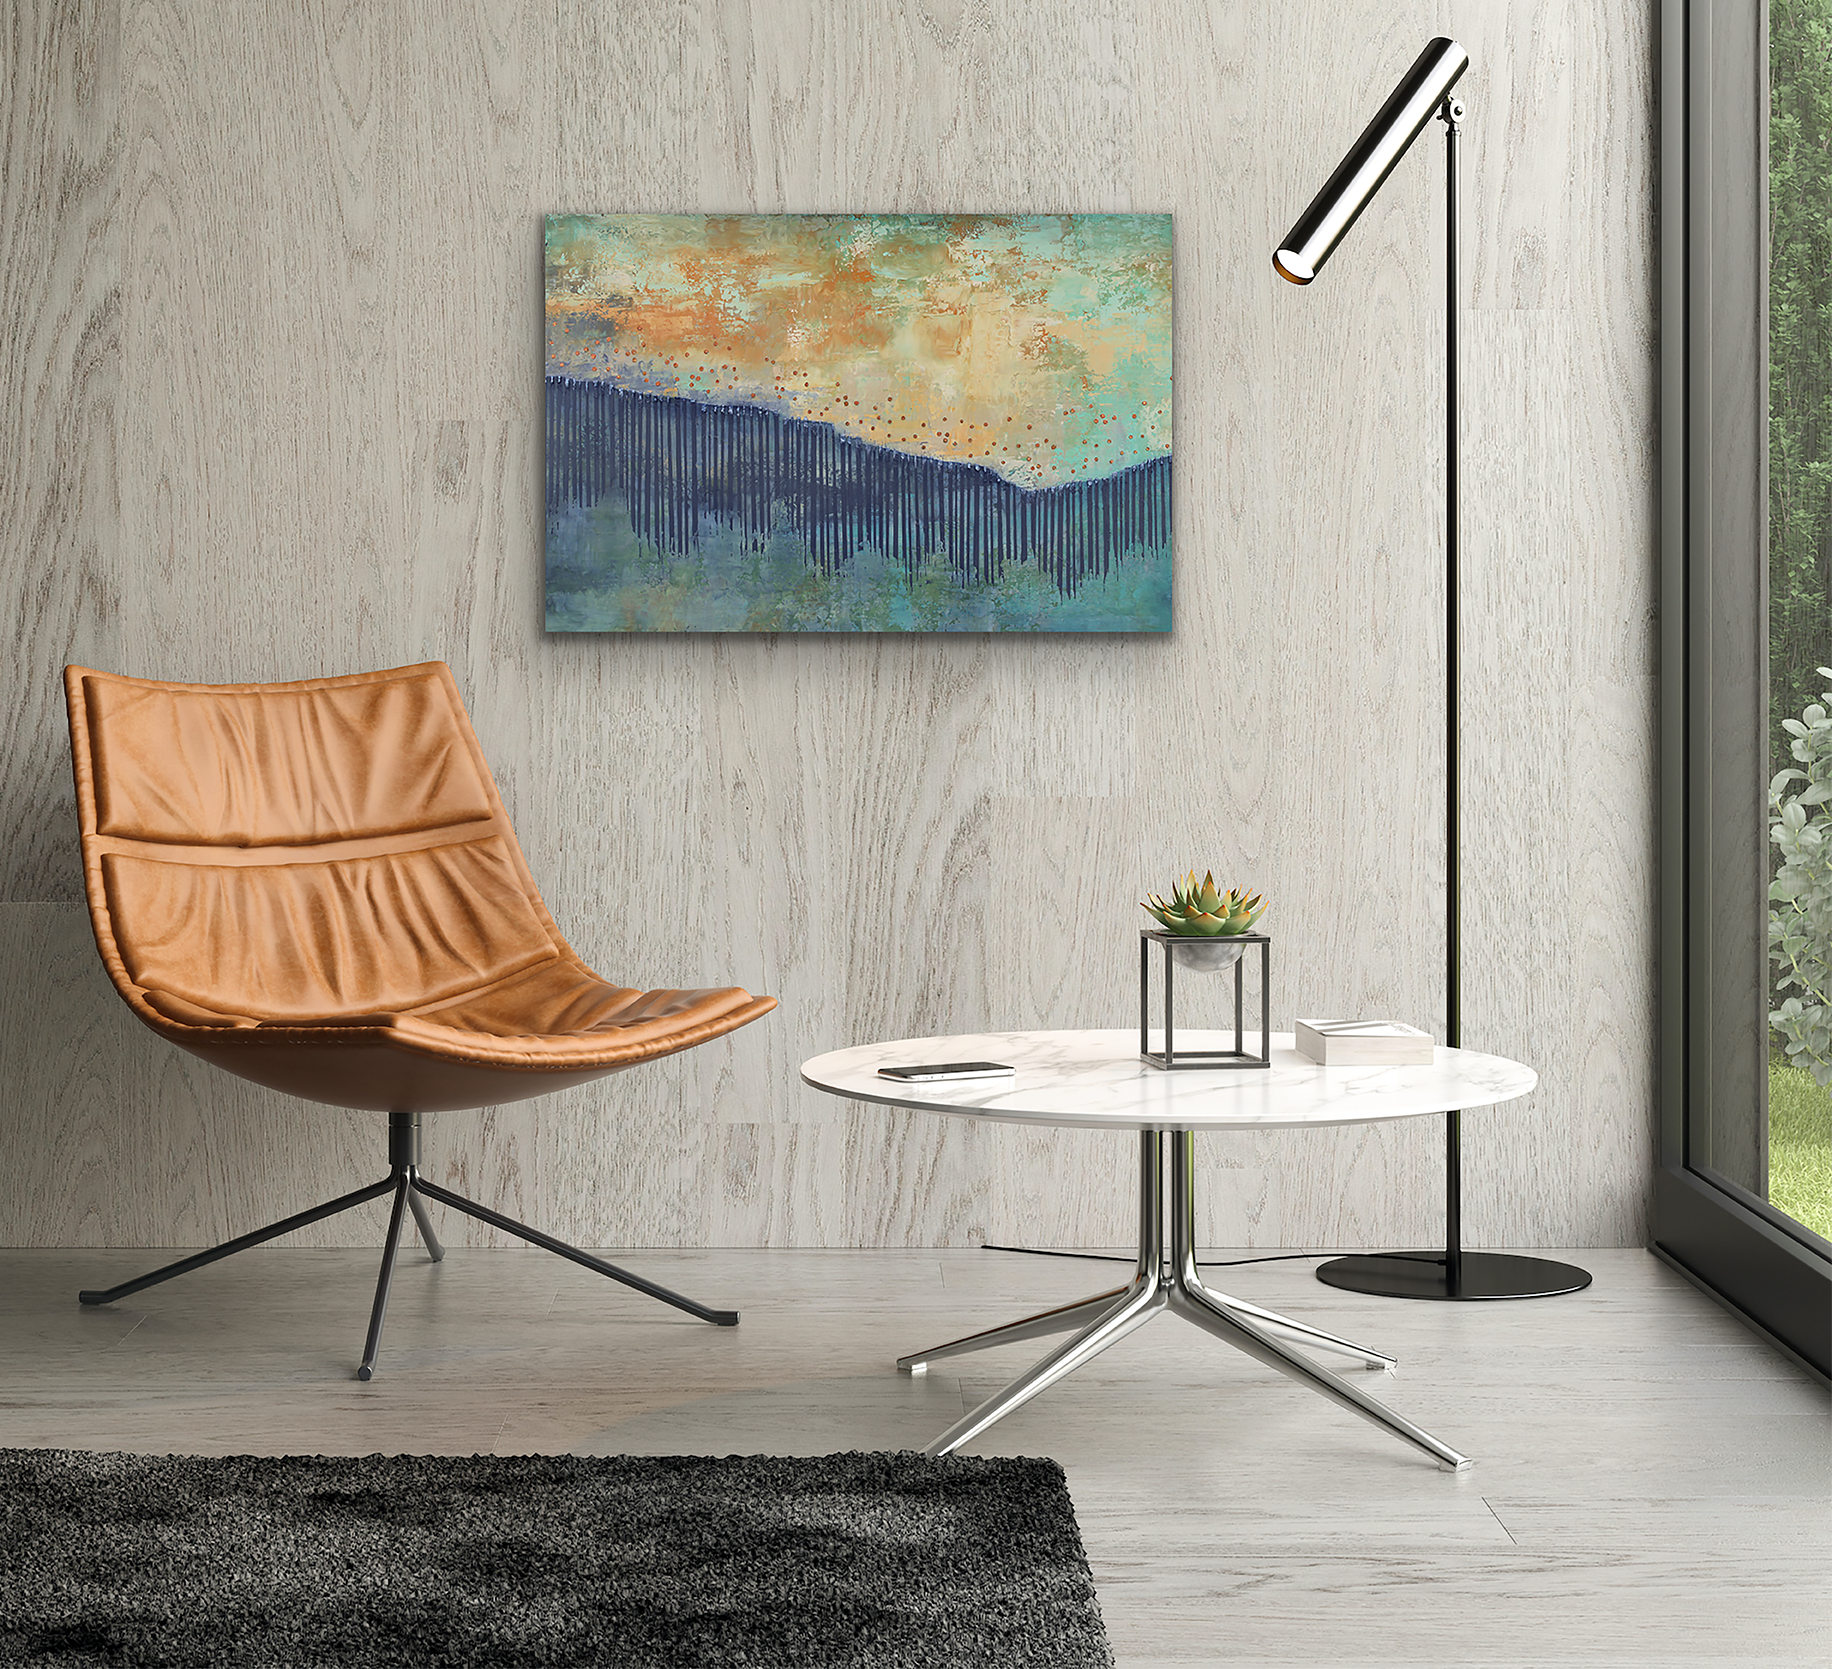 Abstract wall art over chair